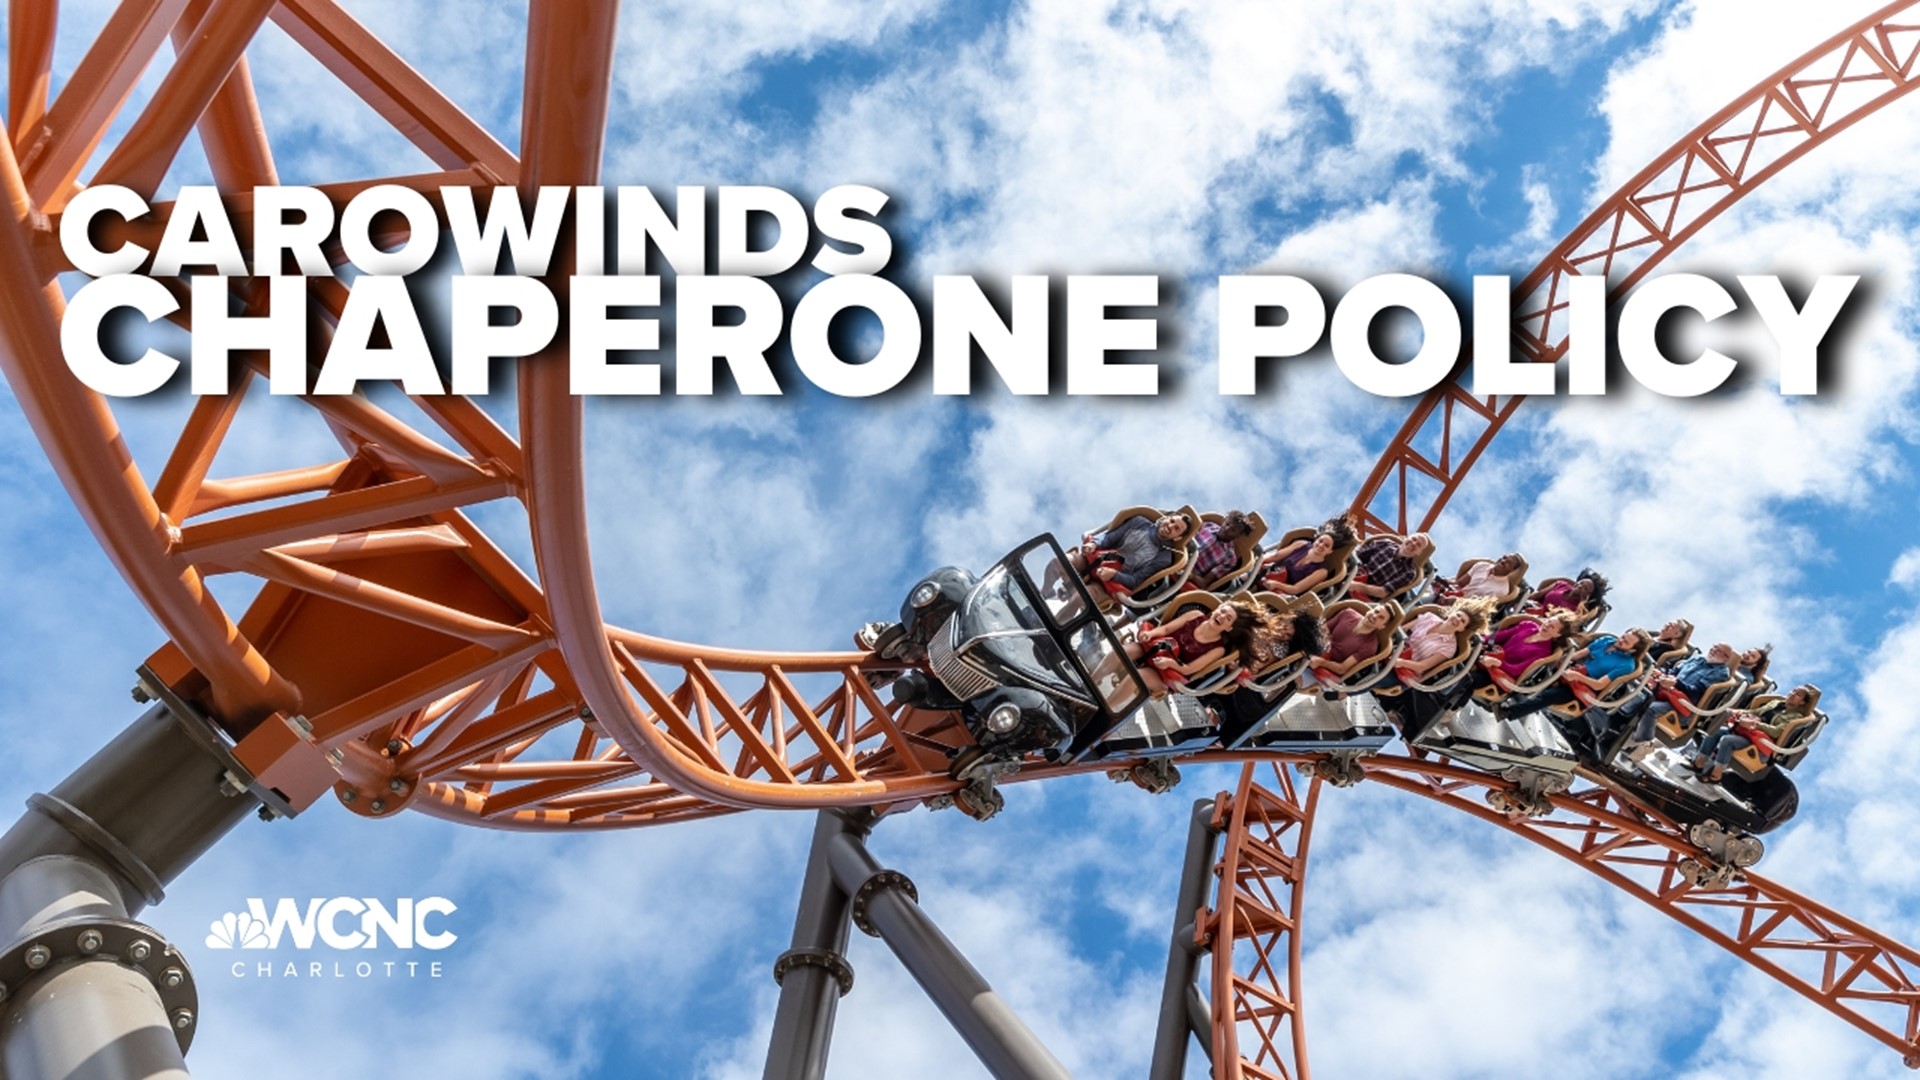 Starting April 22, Carowinds will require all guests age 15 and younger to be accompanied by an adult who is at least 21.